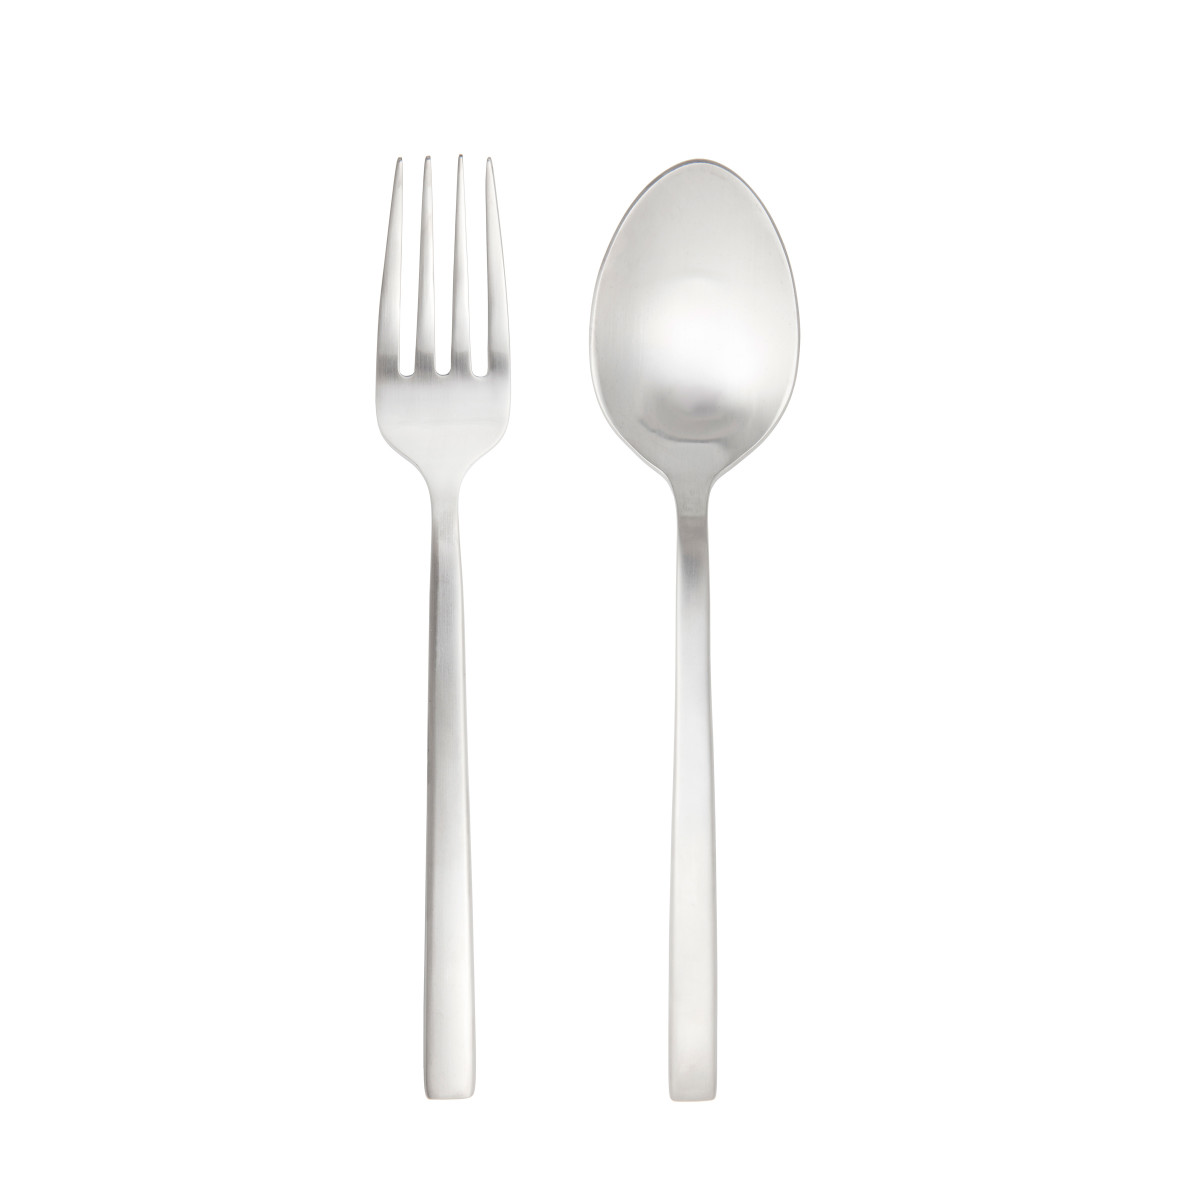 Arezzo Flatware, Brushed Stainless Steel, 2-Piece Serving Set